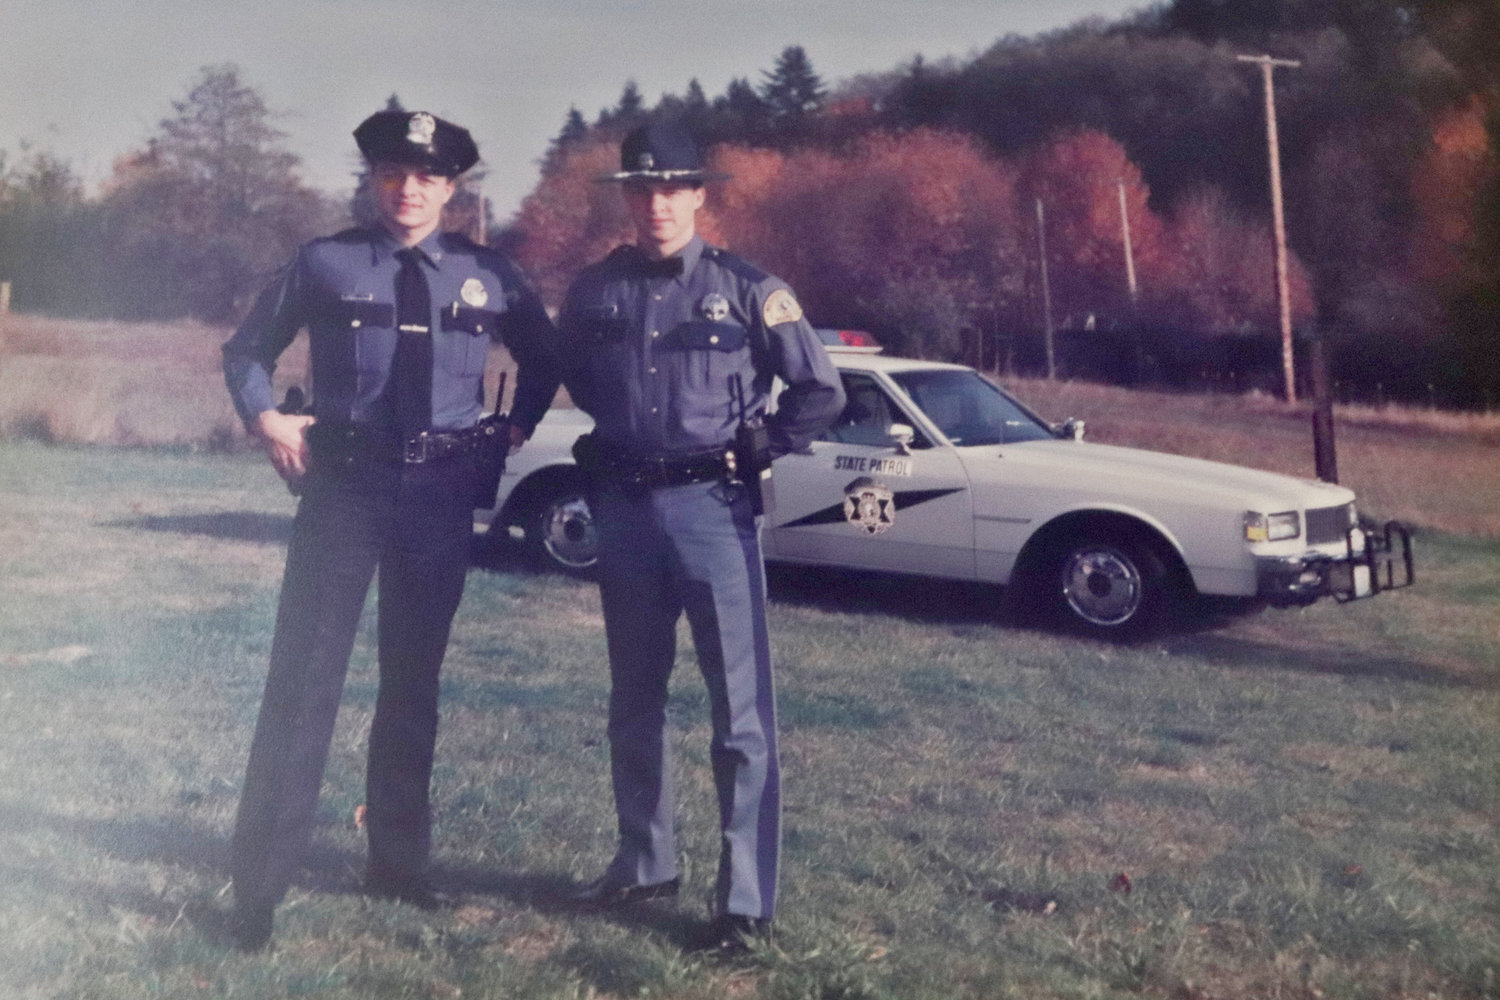 The Thornburgs now share a security office at W.F. West High School, complete with a framed photo of the brothers from their law enforcement days, but they don’t see each other often while on duty.